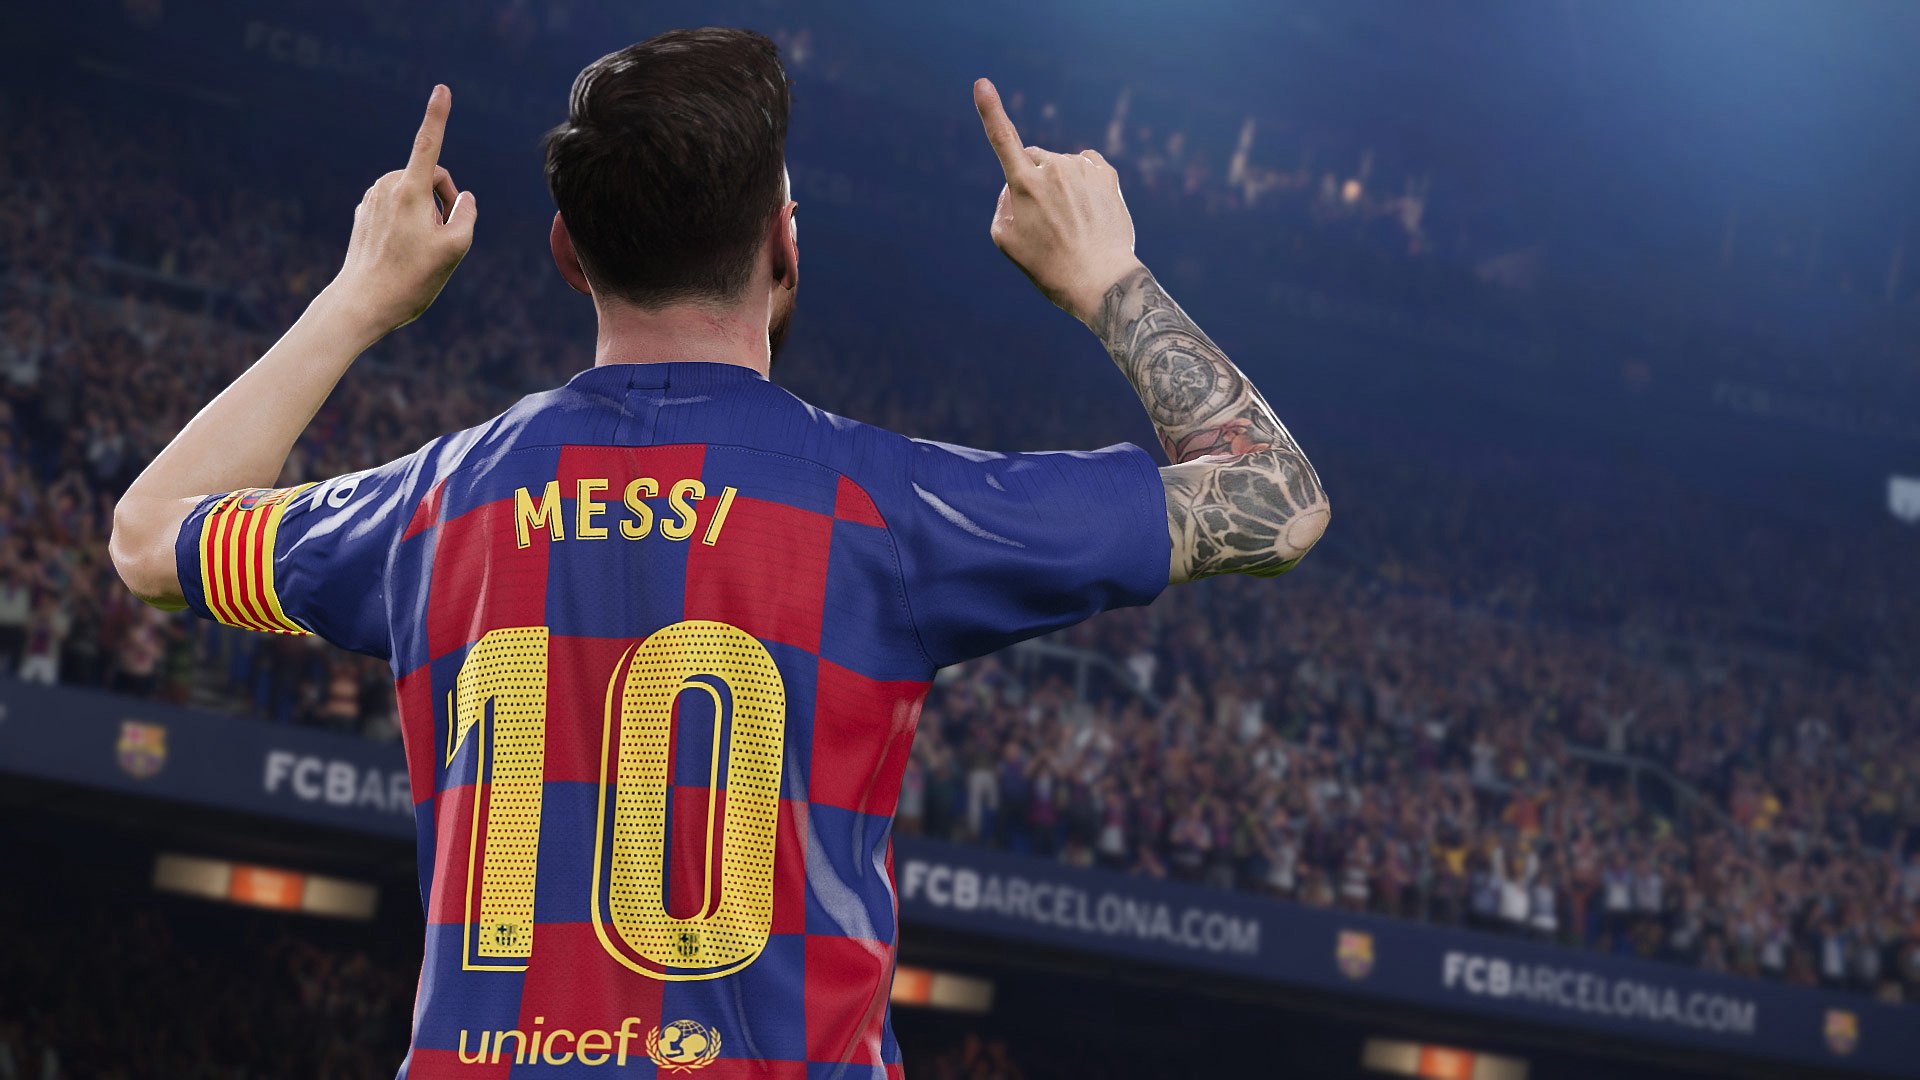 eFootball PES 2020 PlayStation 4 Account pixelpuffin.net Activation Link 13.55 usd